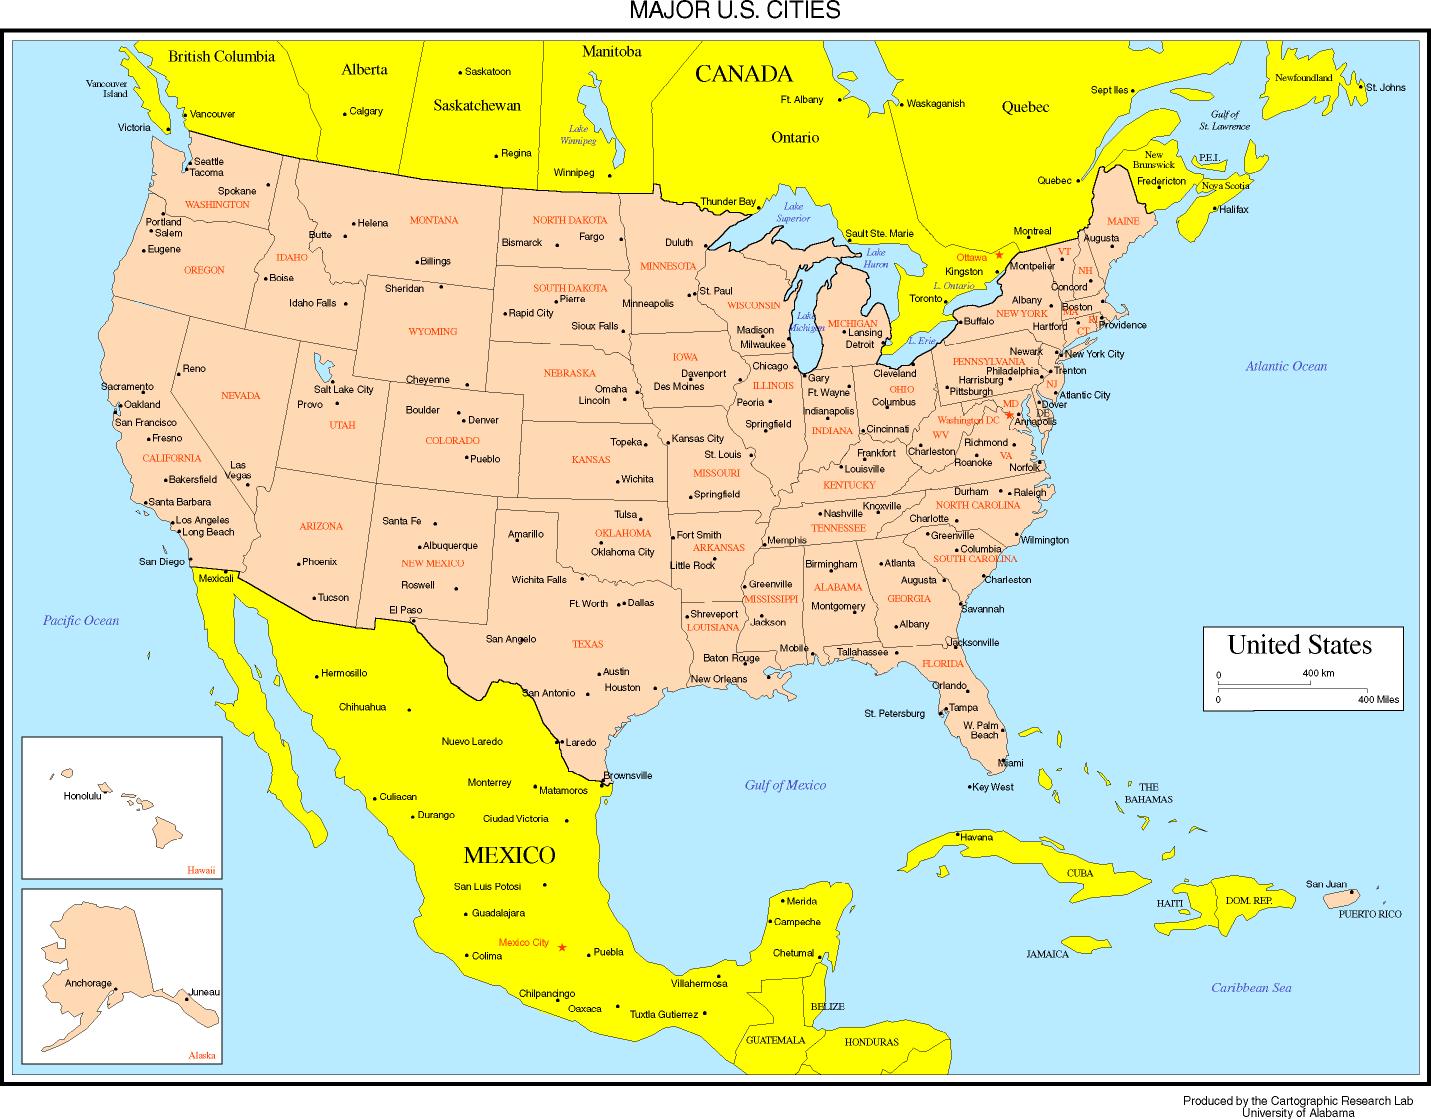 Map Of Usa States And Major Cities